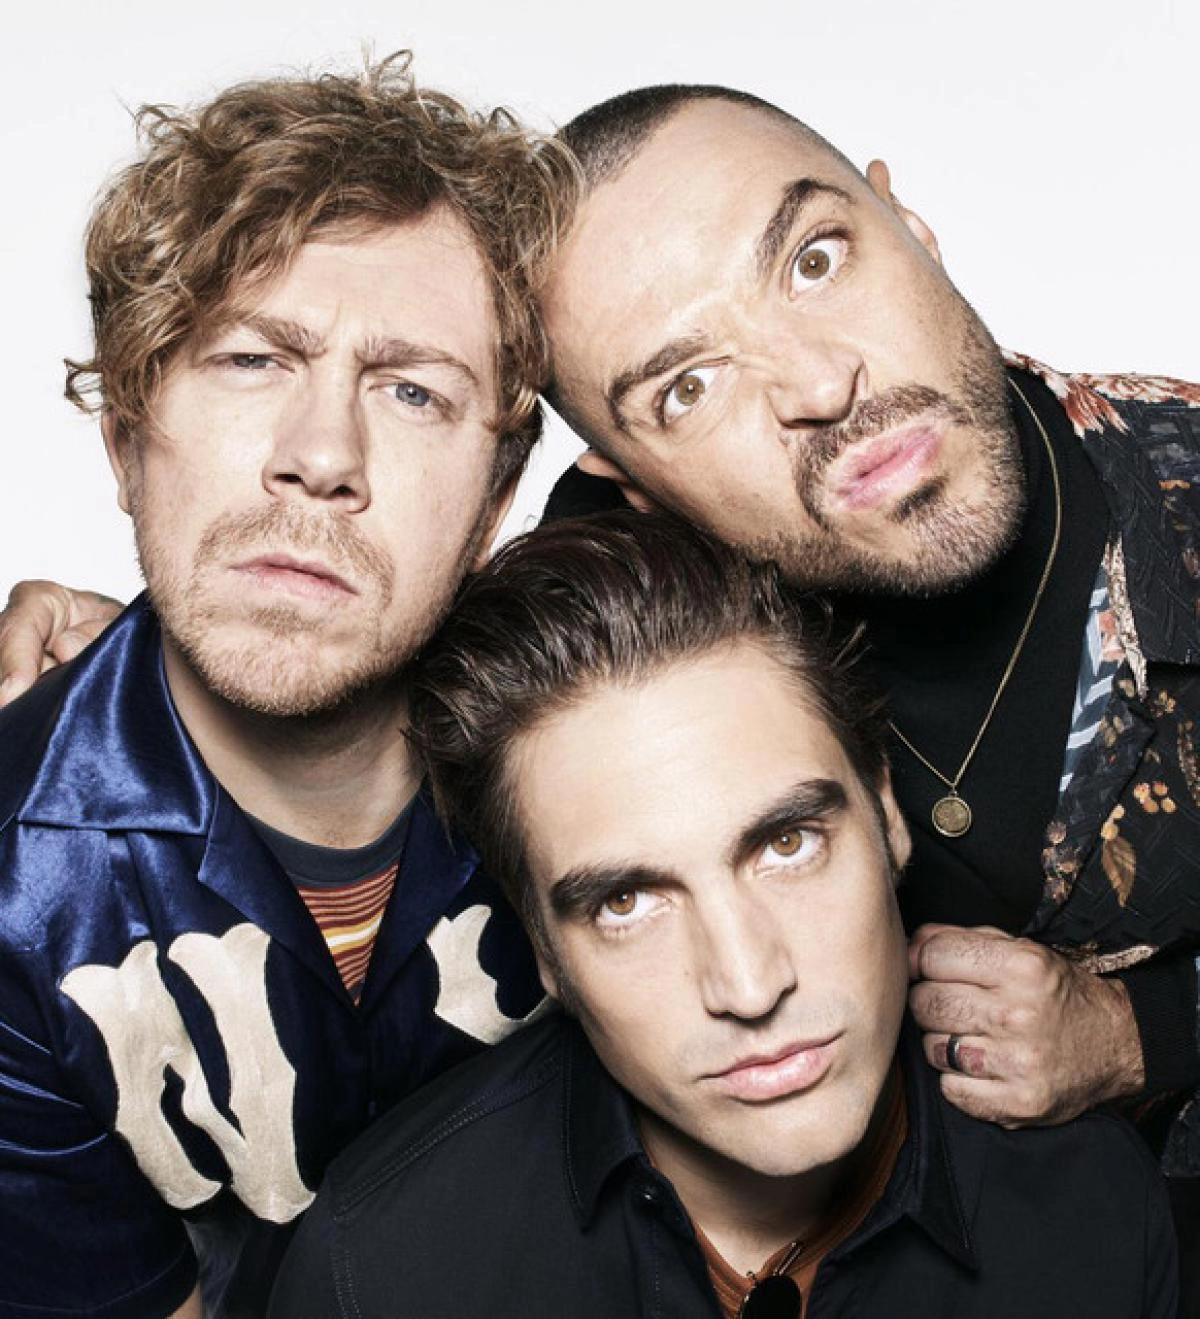 Busted en Scarborough Open Air Theatre Tickets